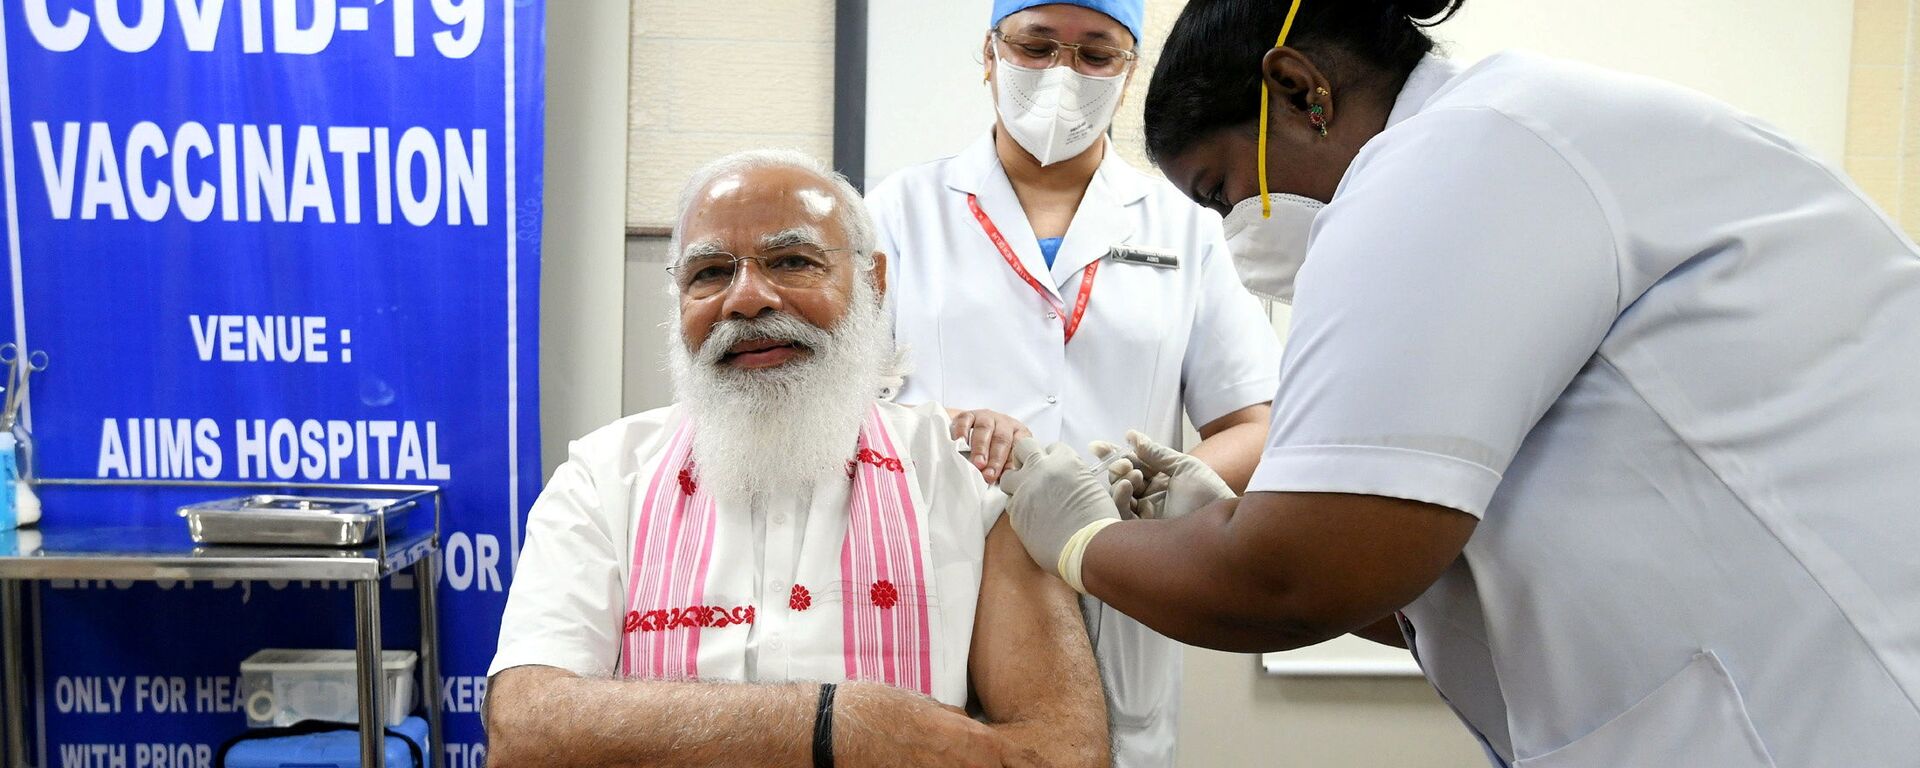 India's Prime Minister Narendra Modi receives a dose of COVAXIN, a coronavirus disease (COVID-19) vaccine developed by India's Bharat Biotech and the state-run Indian Council of Medical Research, at All India Institute of Medical Sciences (AIIMS) hospital in New Delhi, India, March 1, 2021 - Sputnik International, 1920